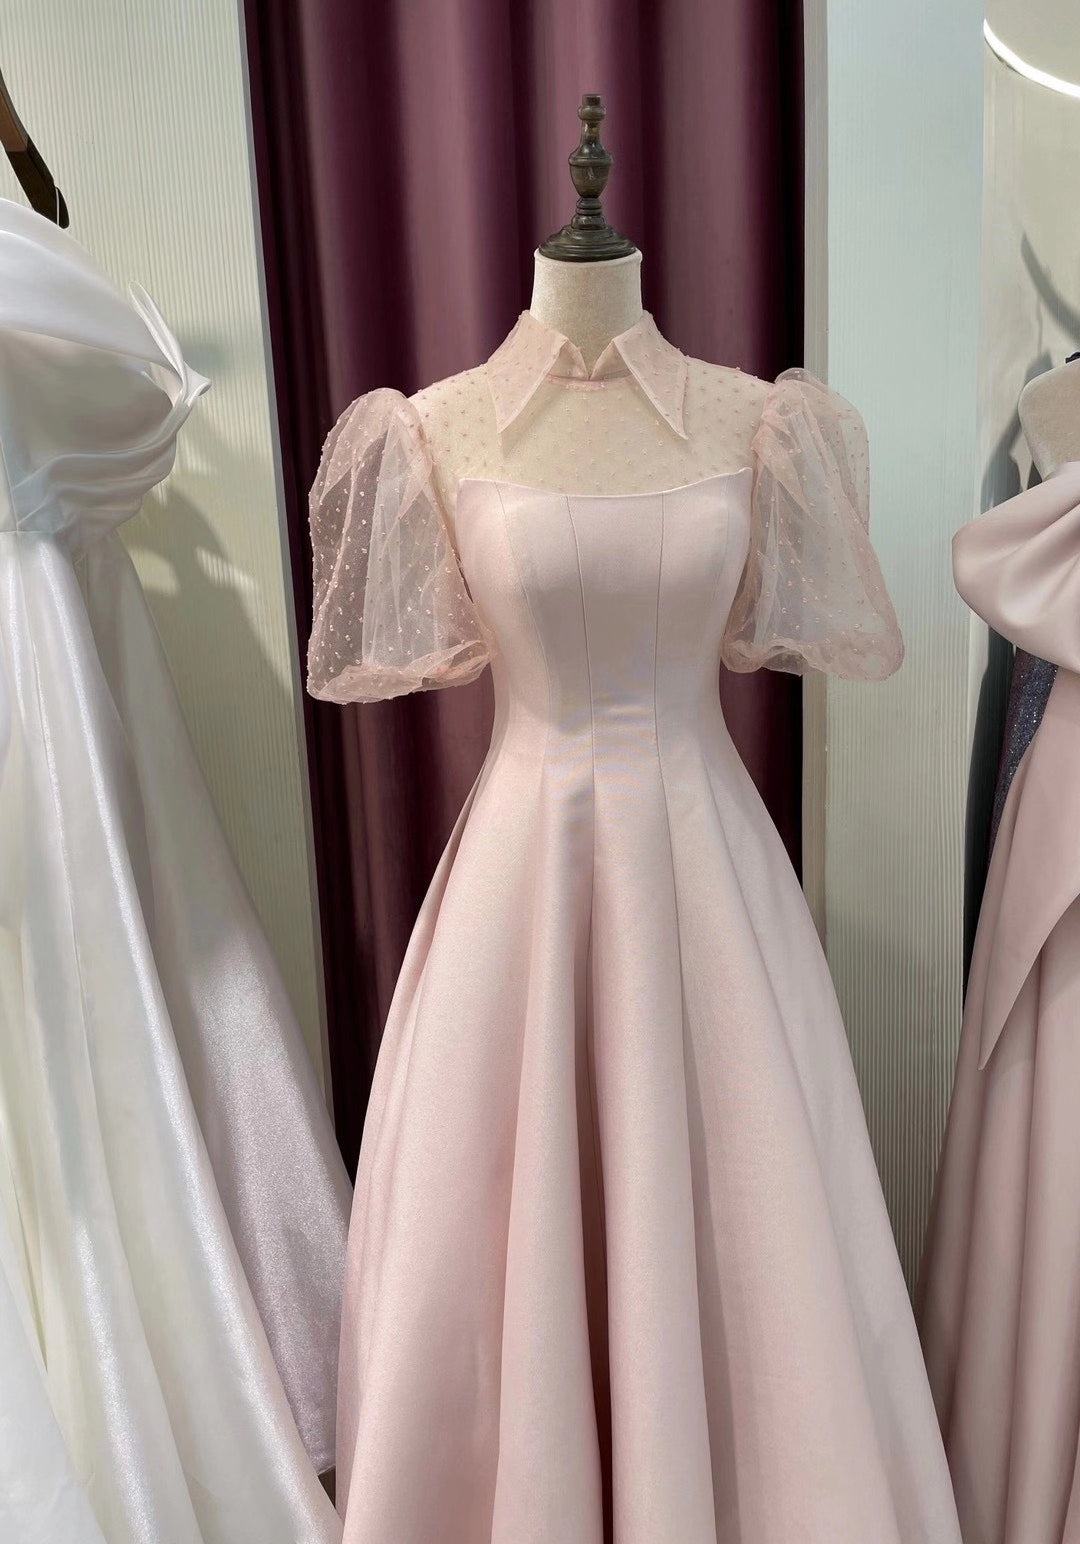 Lovely Pale Pink Satin Long A-line Prom Dresses, 2021 Prom Dresses, Cheap Prom Dresses